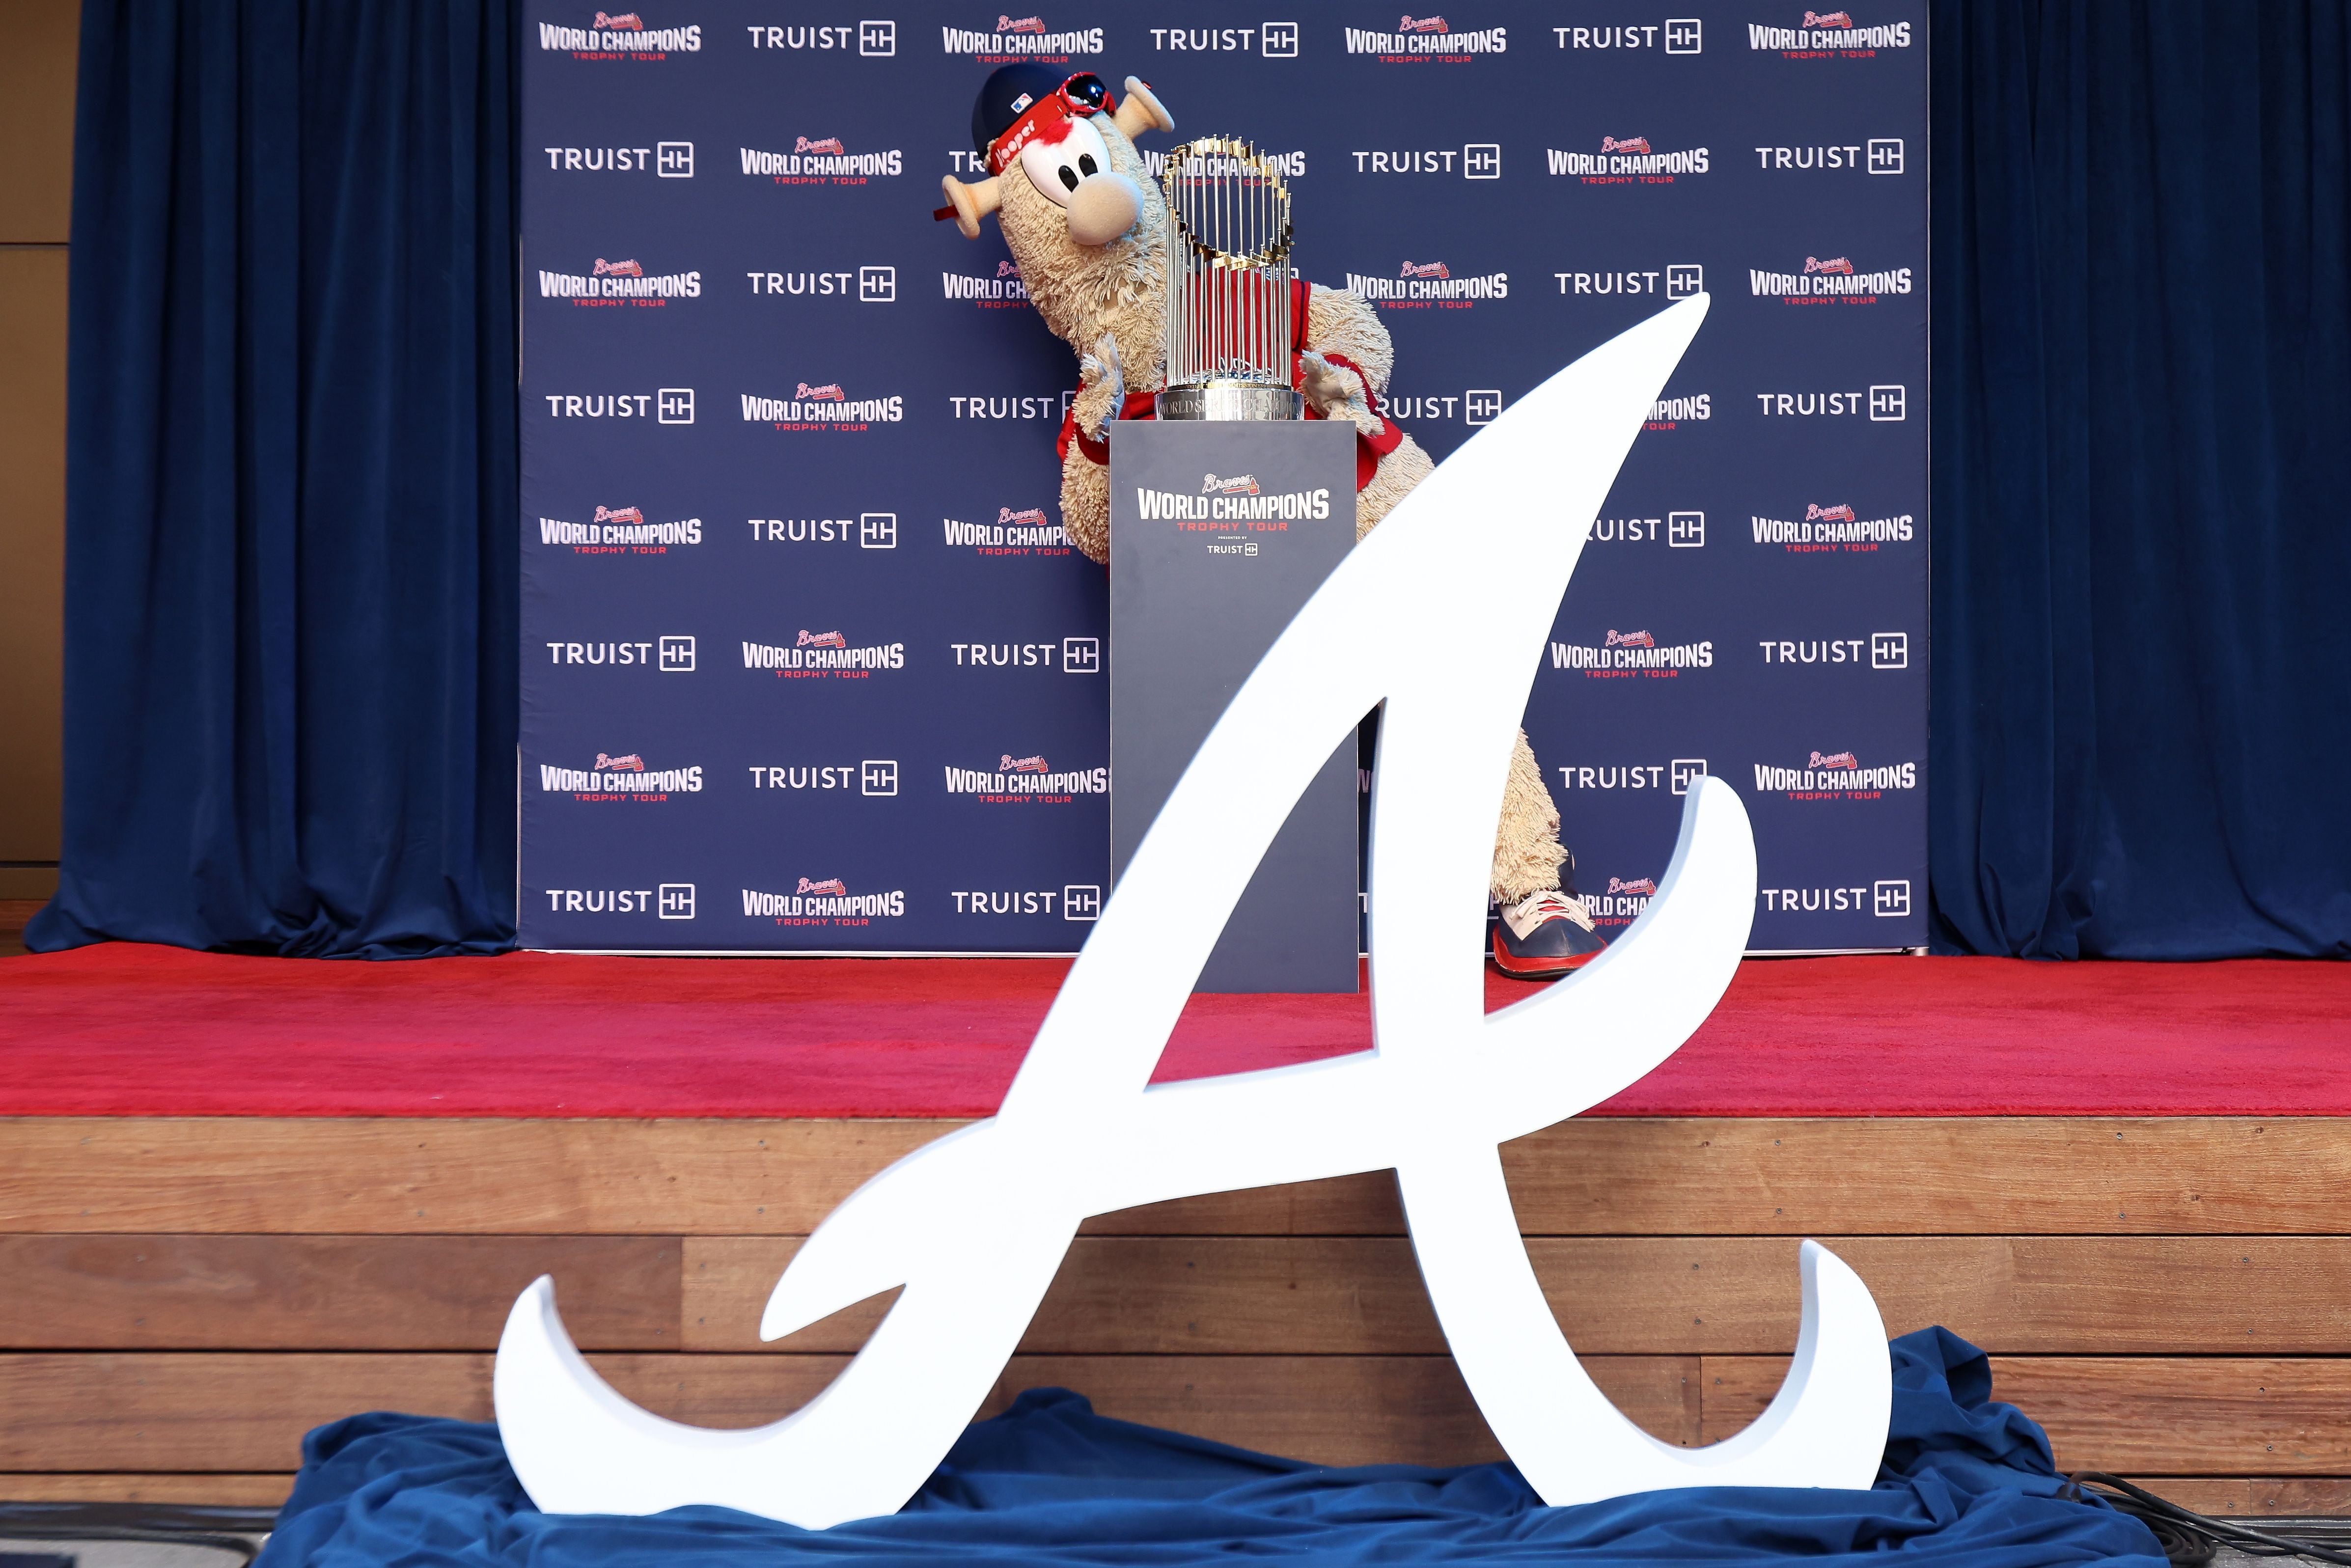 Atlanta Braves World Series Trophy Tour makes a stop in Wilmington